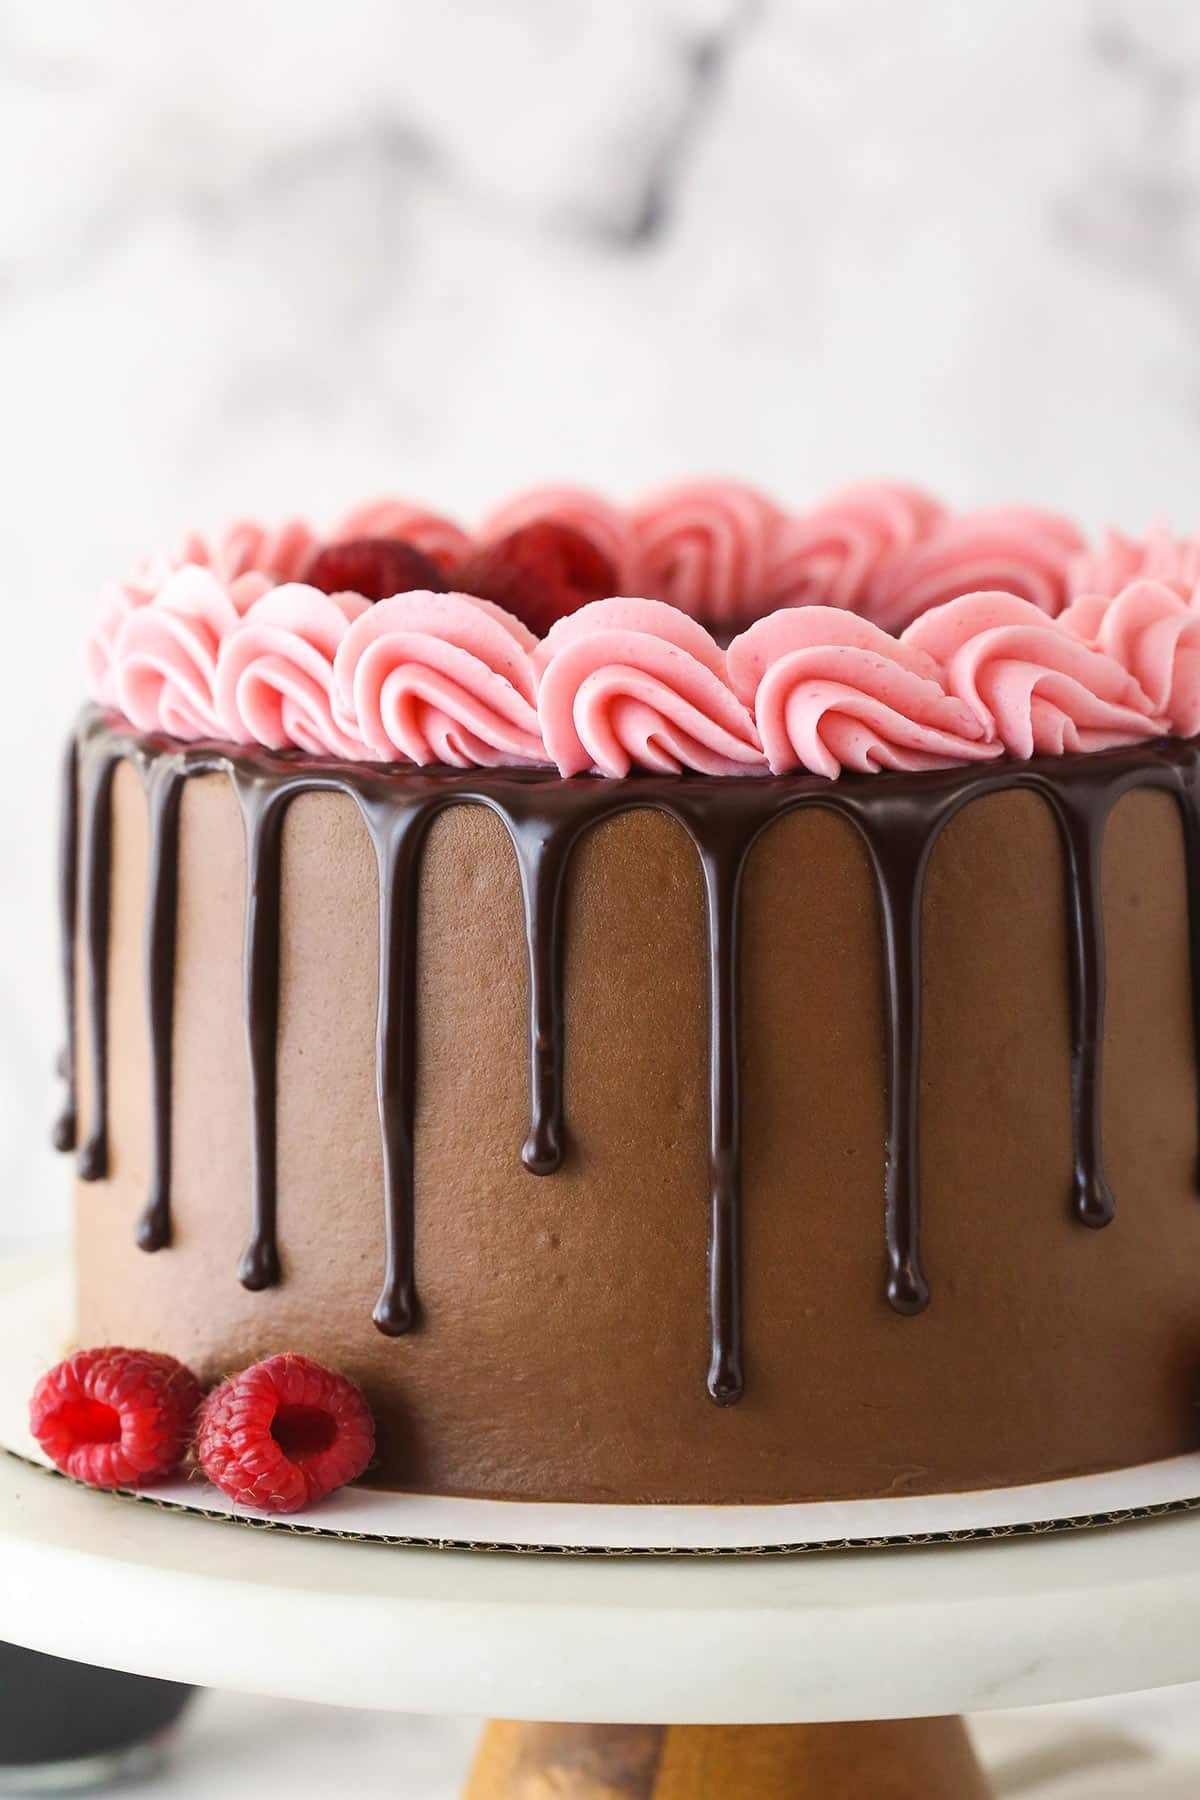 Red wine chocolate cake on a cake stand.